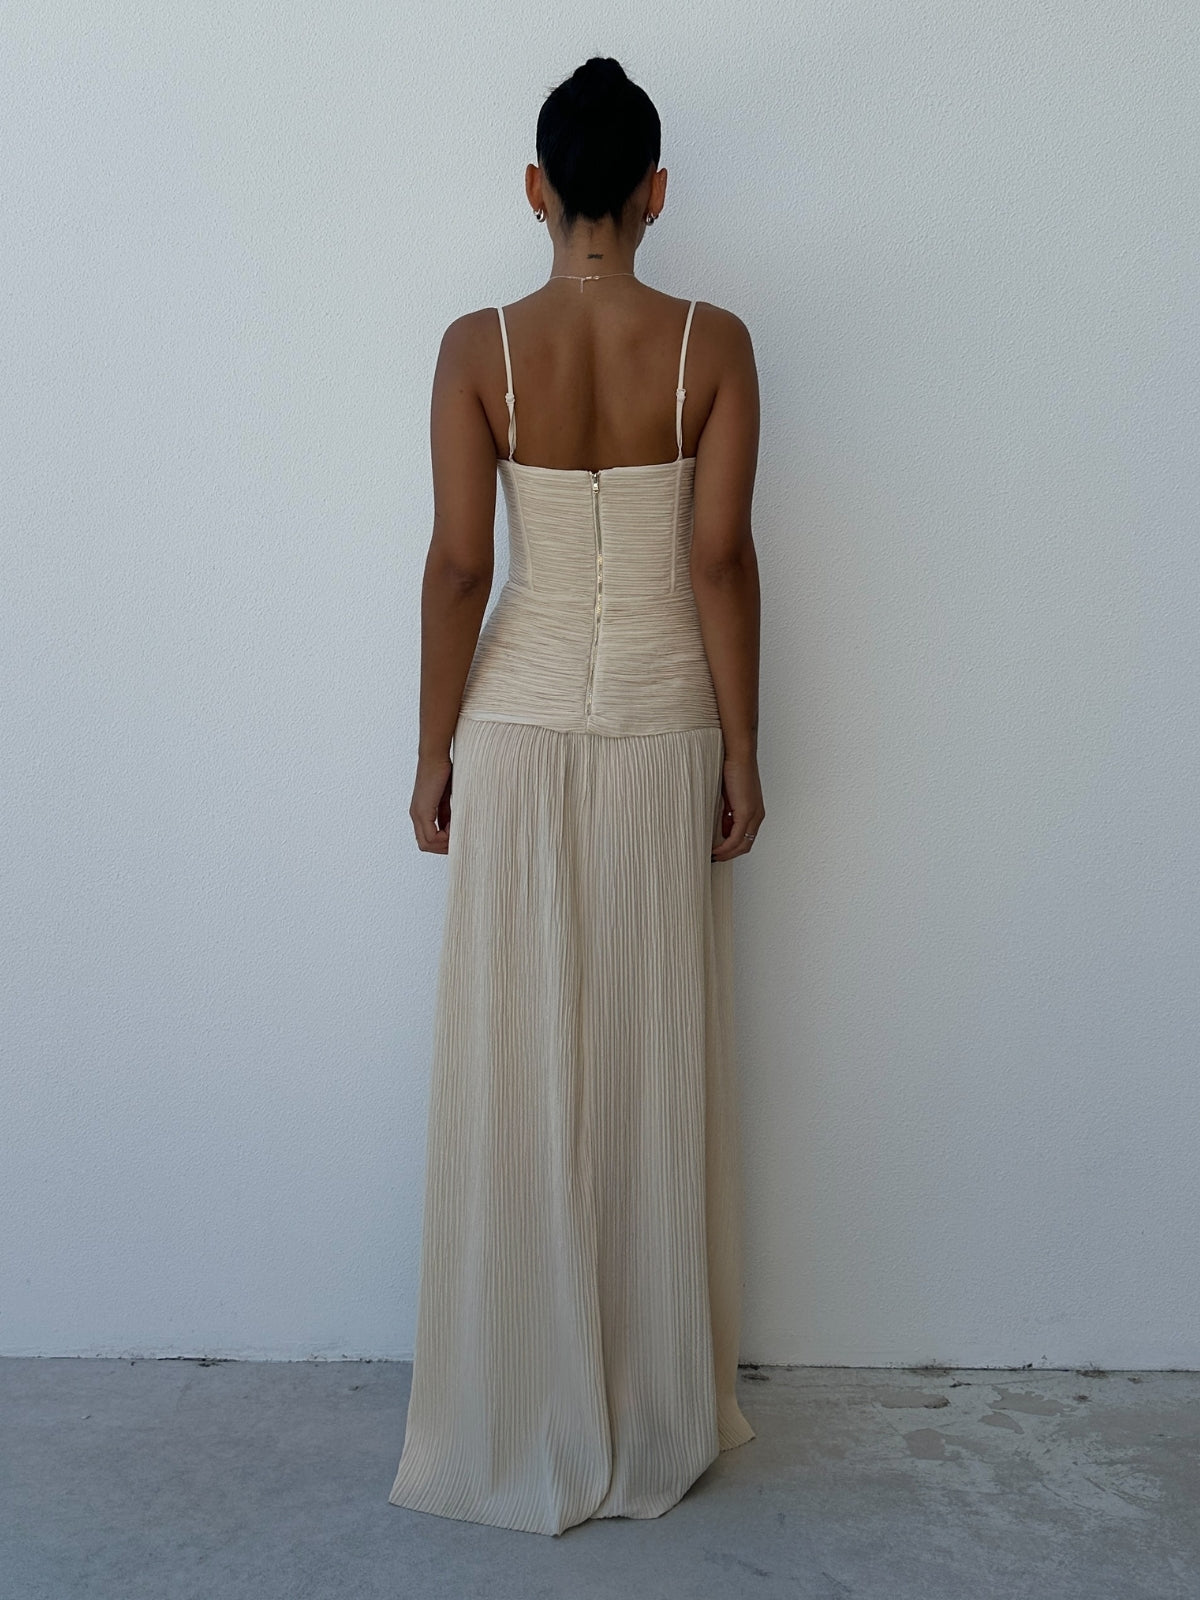 Manning Cartell | Pleat Gown - Cream | Loan That Label 